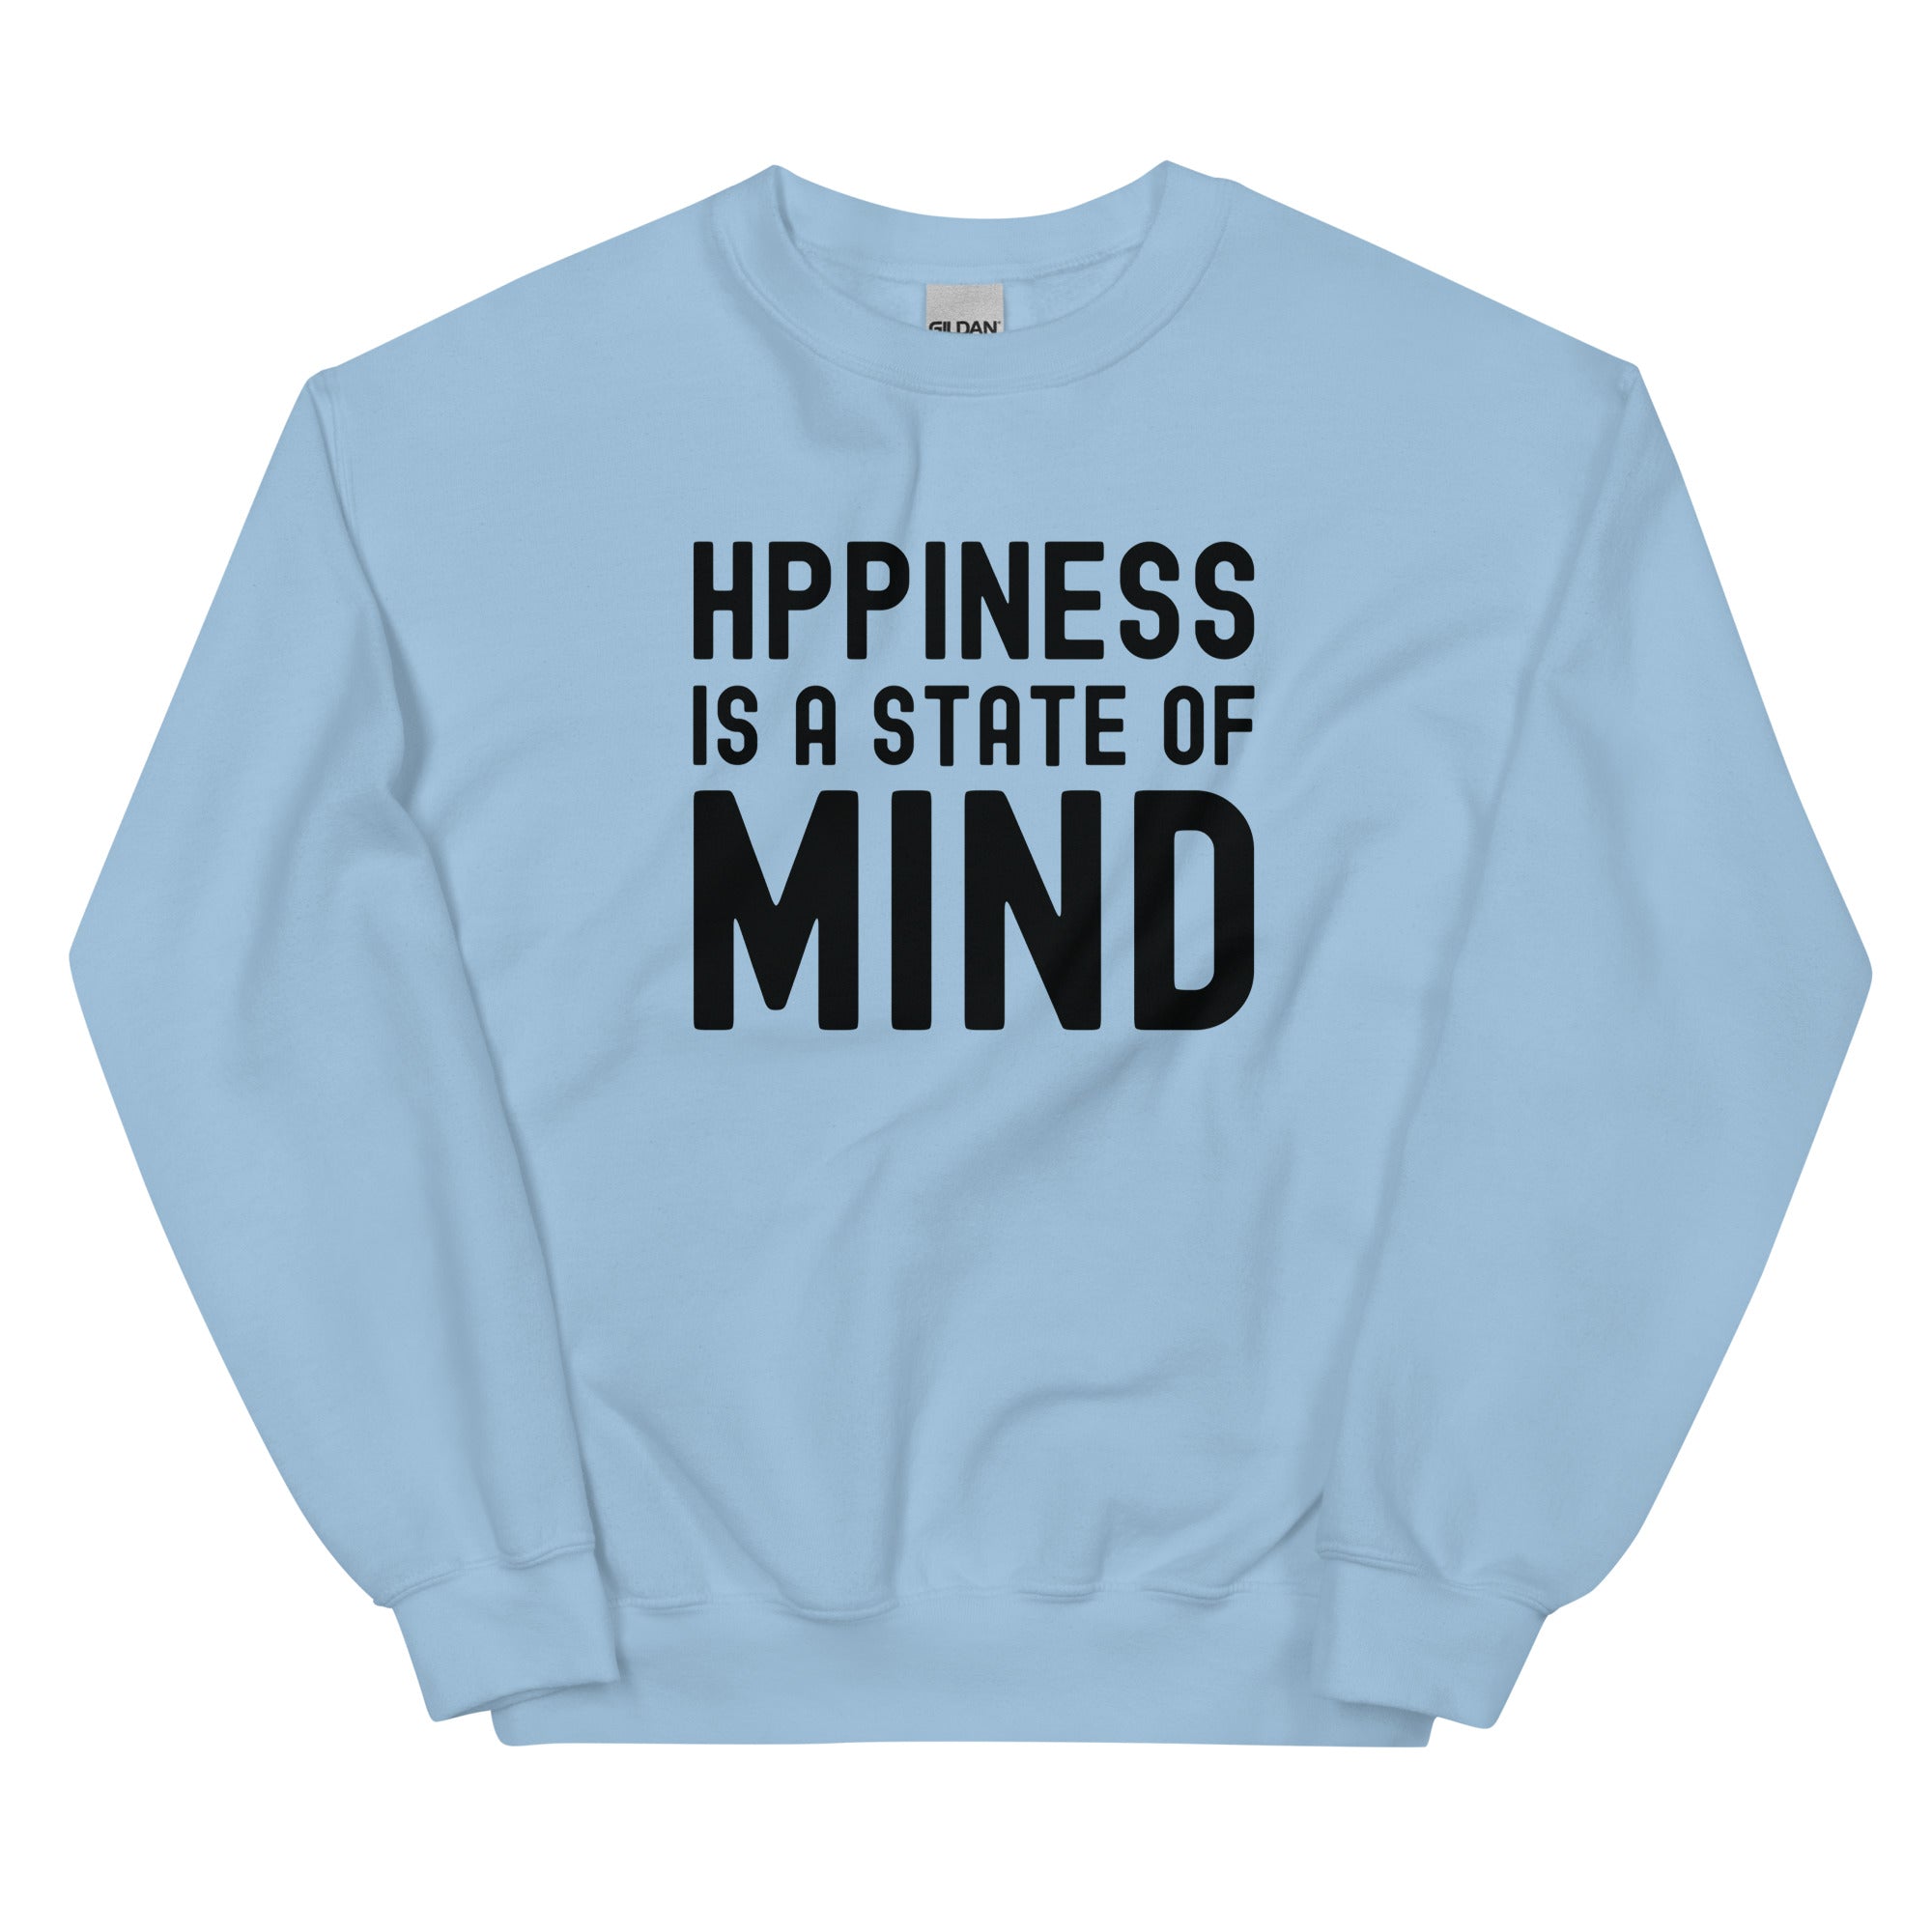 Unisex Sweatshirt | Hppiness is a state of mind